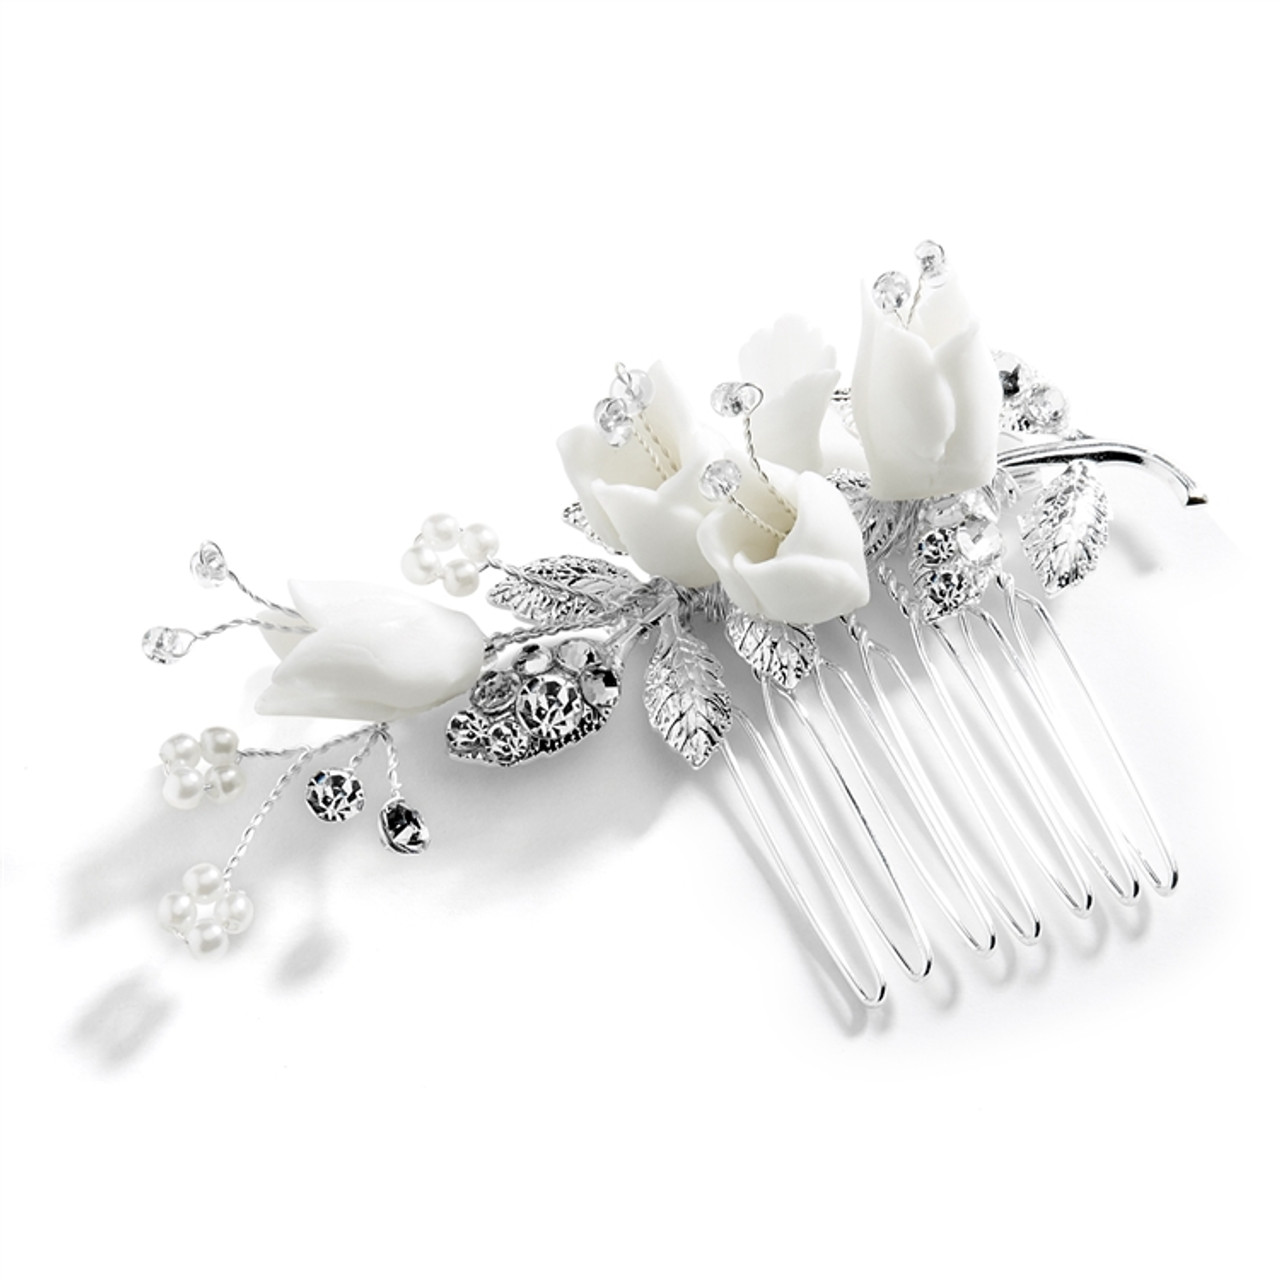 Mariell Bridal Hair Comb with Silver Leaves, White Resin Flowers and and Crystals 4603HC-S